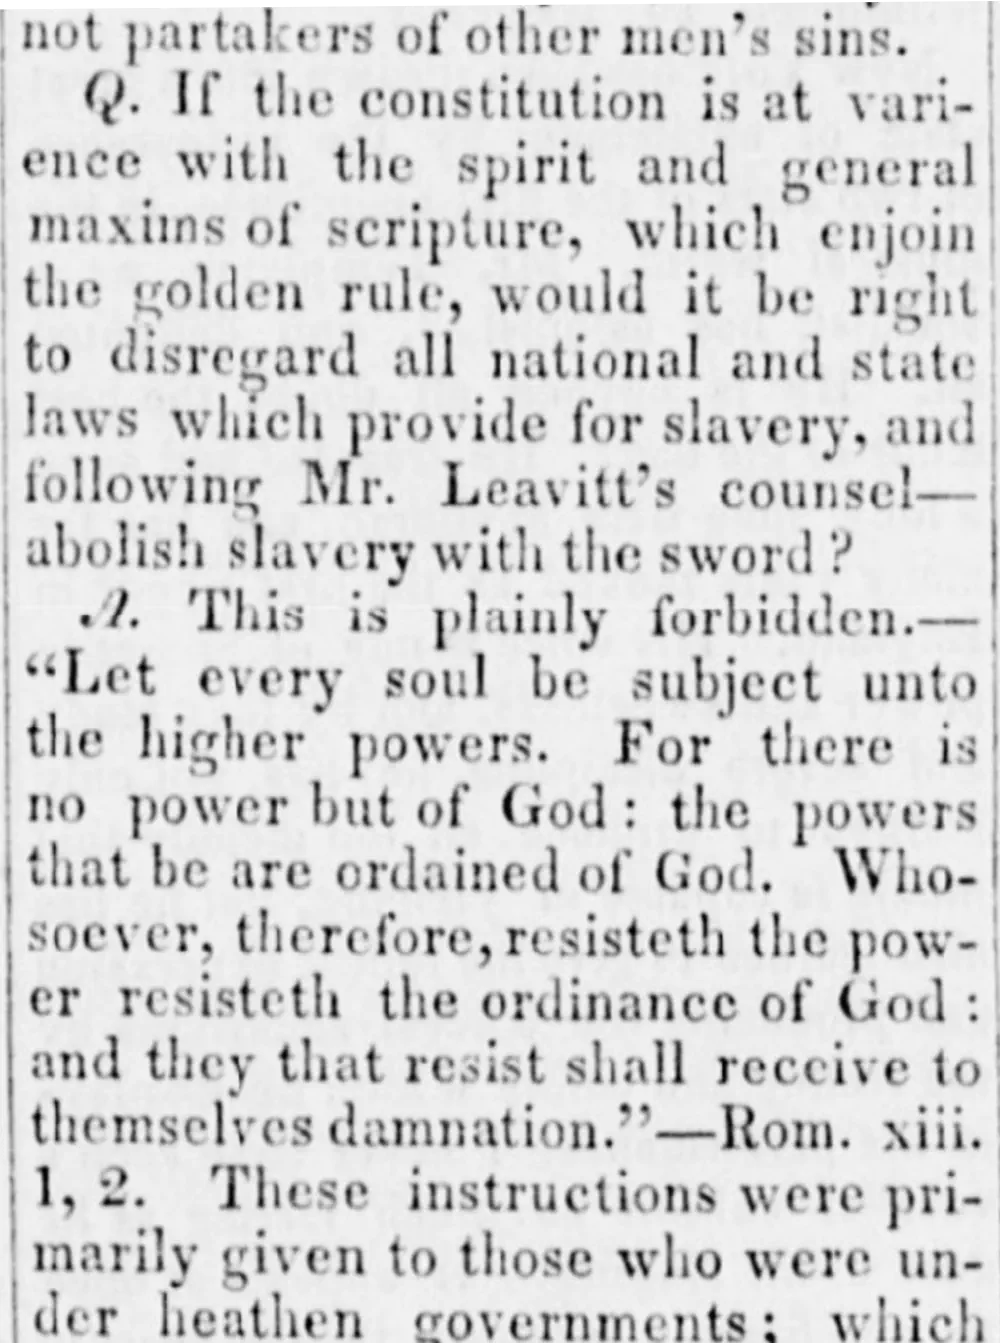 Illinois minister Asa Donaldson&rsquo;s &ldquo;Bible Anti-Slavery Catechism&rdquo; was firmly anti-slavery, yet on the basis of Romans 13 it also constrained the actions that Christians could take to resist slavery. The Ottawa Free Trader (Ottawa, IL), 31 October 1845.